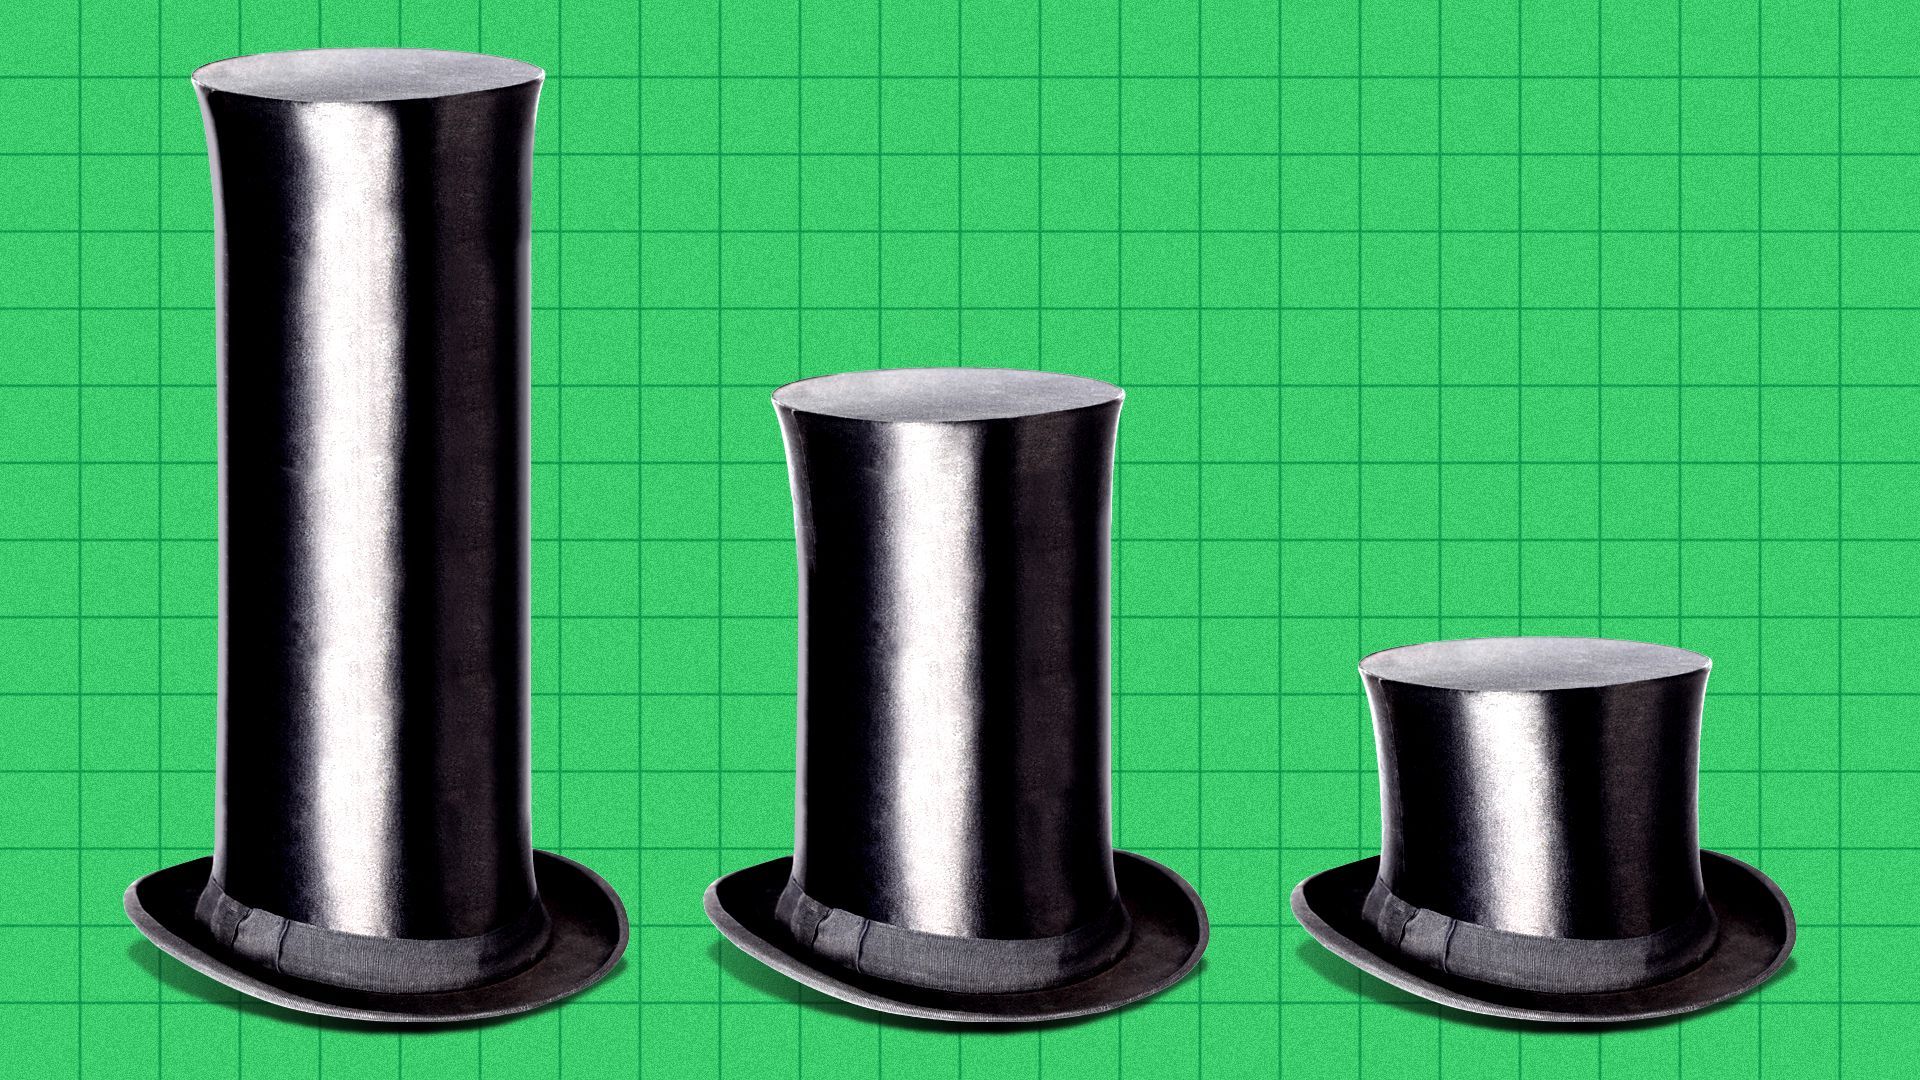 Illustration of a bar chart made of top hats of declining sizes.